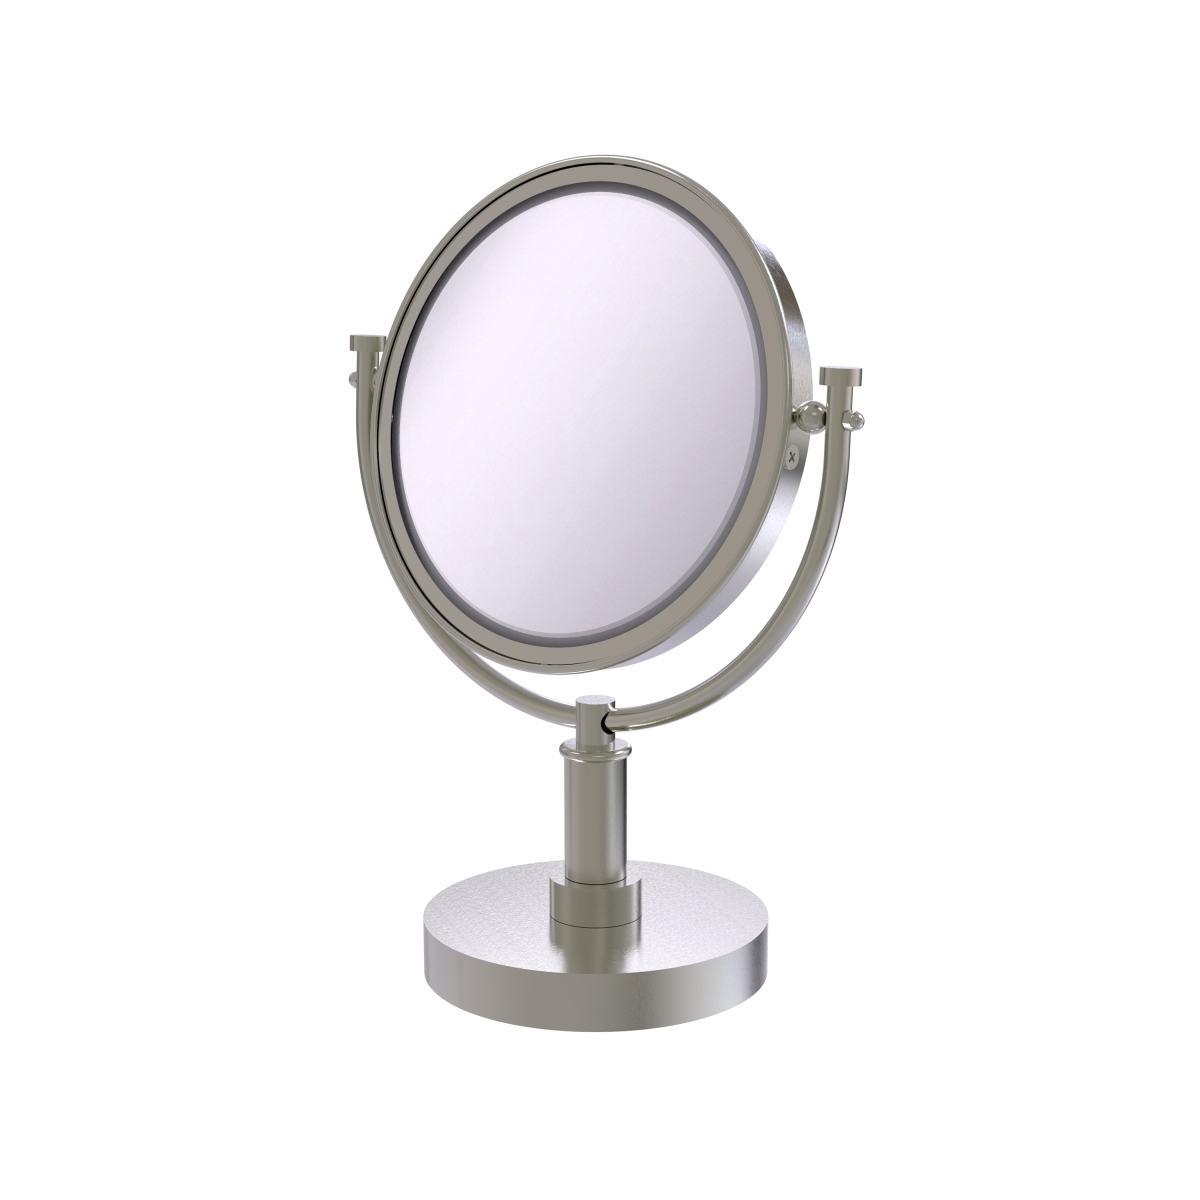 Picture of Allied Brass DM-4-5X-SN 8 in. Vanity Top Make-Up Mirror 5X Magnification, Satin Nickel - 15 x 8 x 8 in.